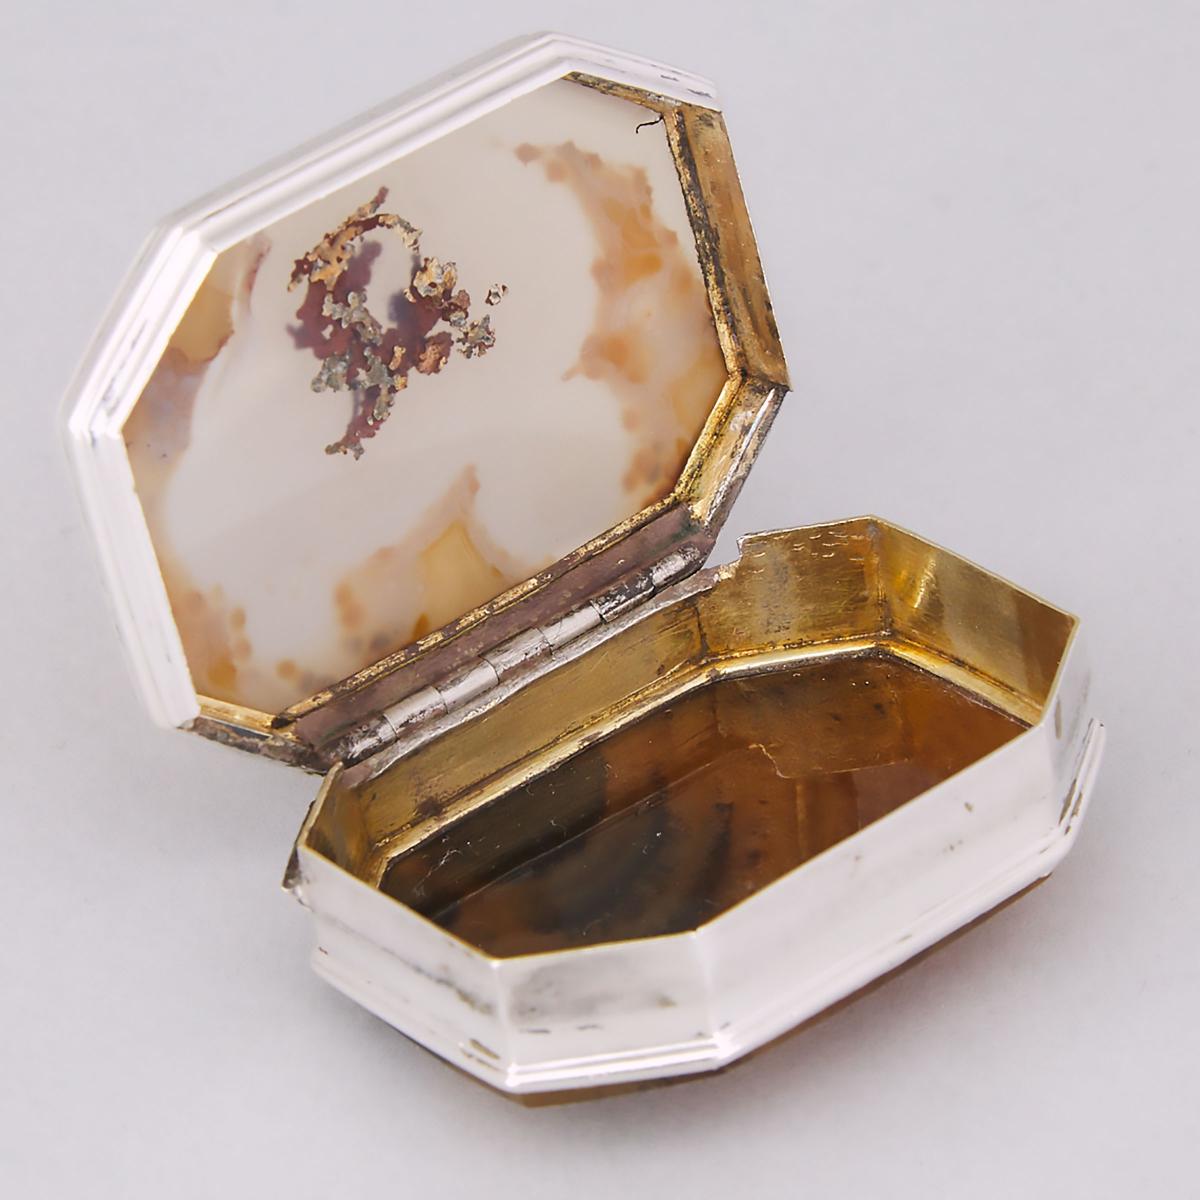 George III Silver Mounted Agate Octagonal Shaped Snuff Box, c.1800, length 2.1 in — 5.3 cm - Image 3 of 3